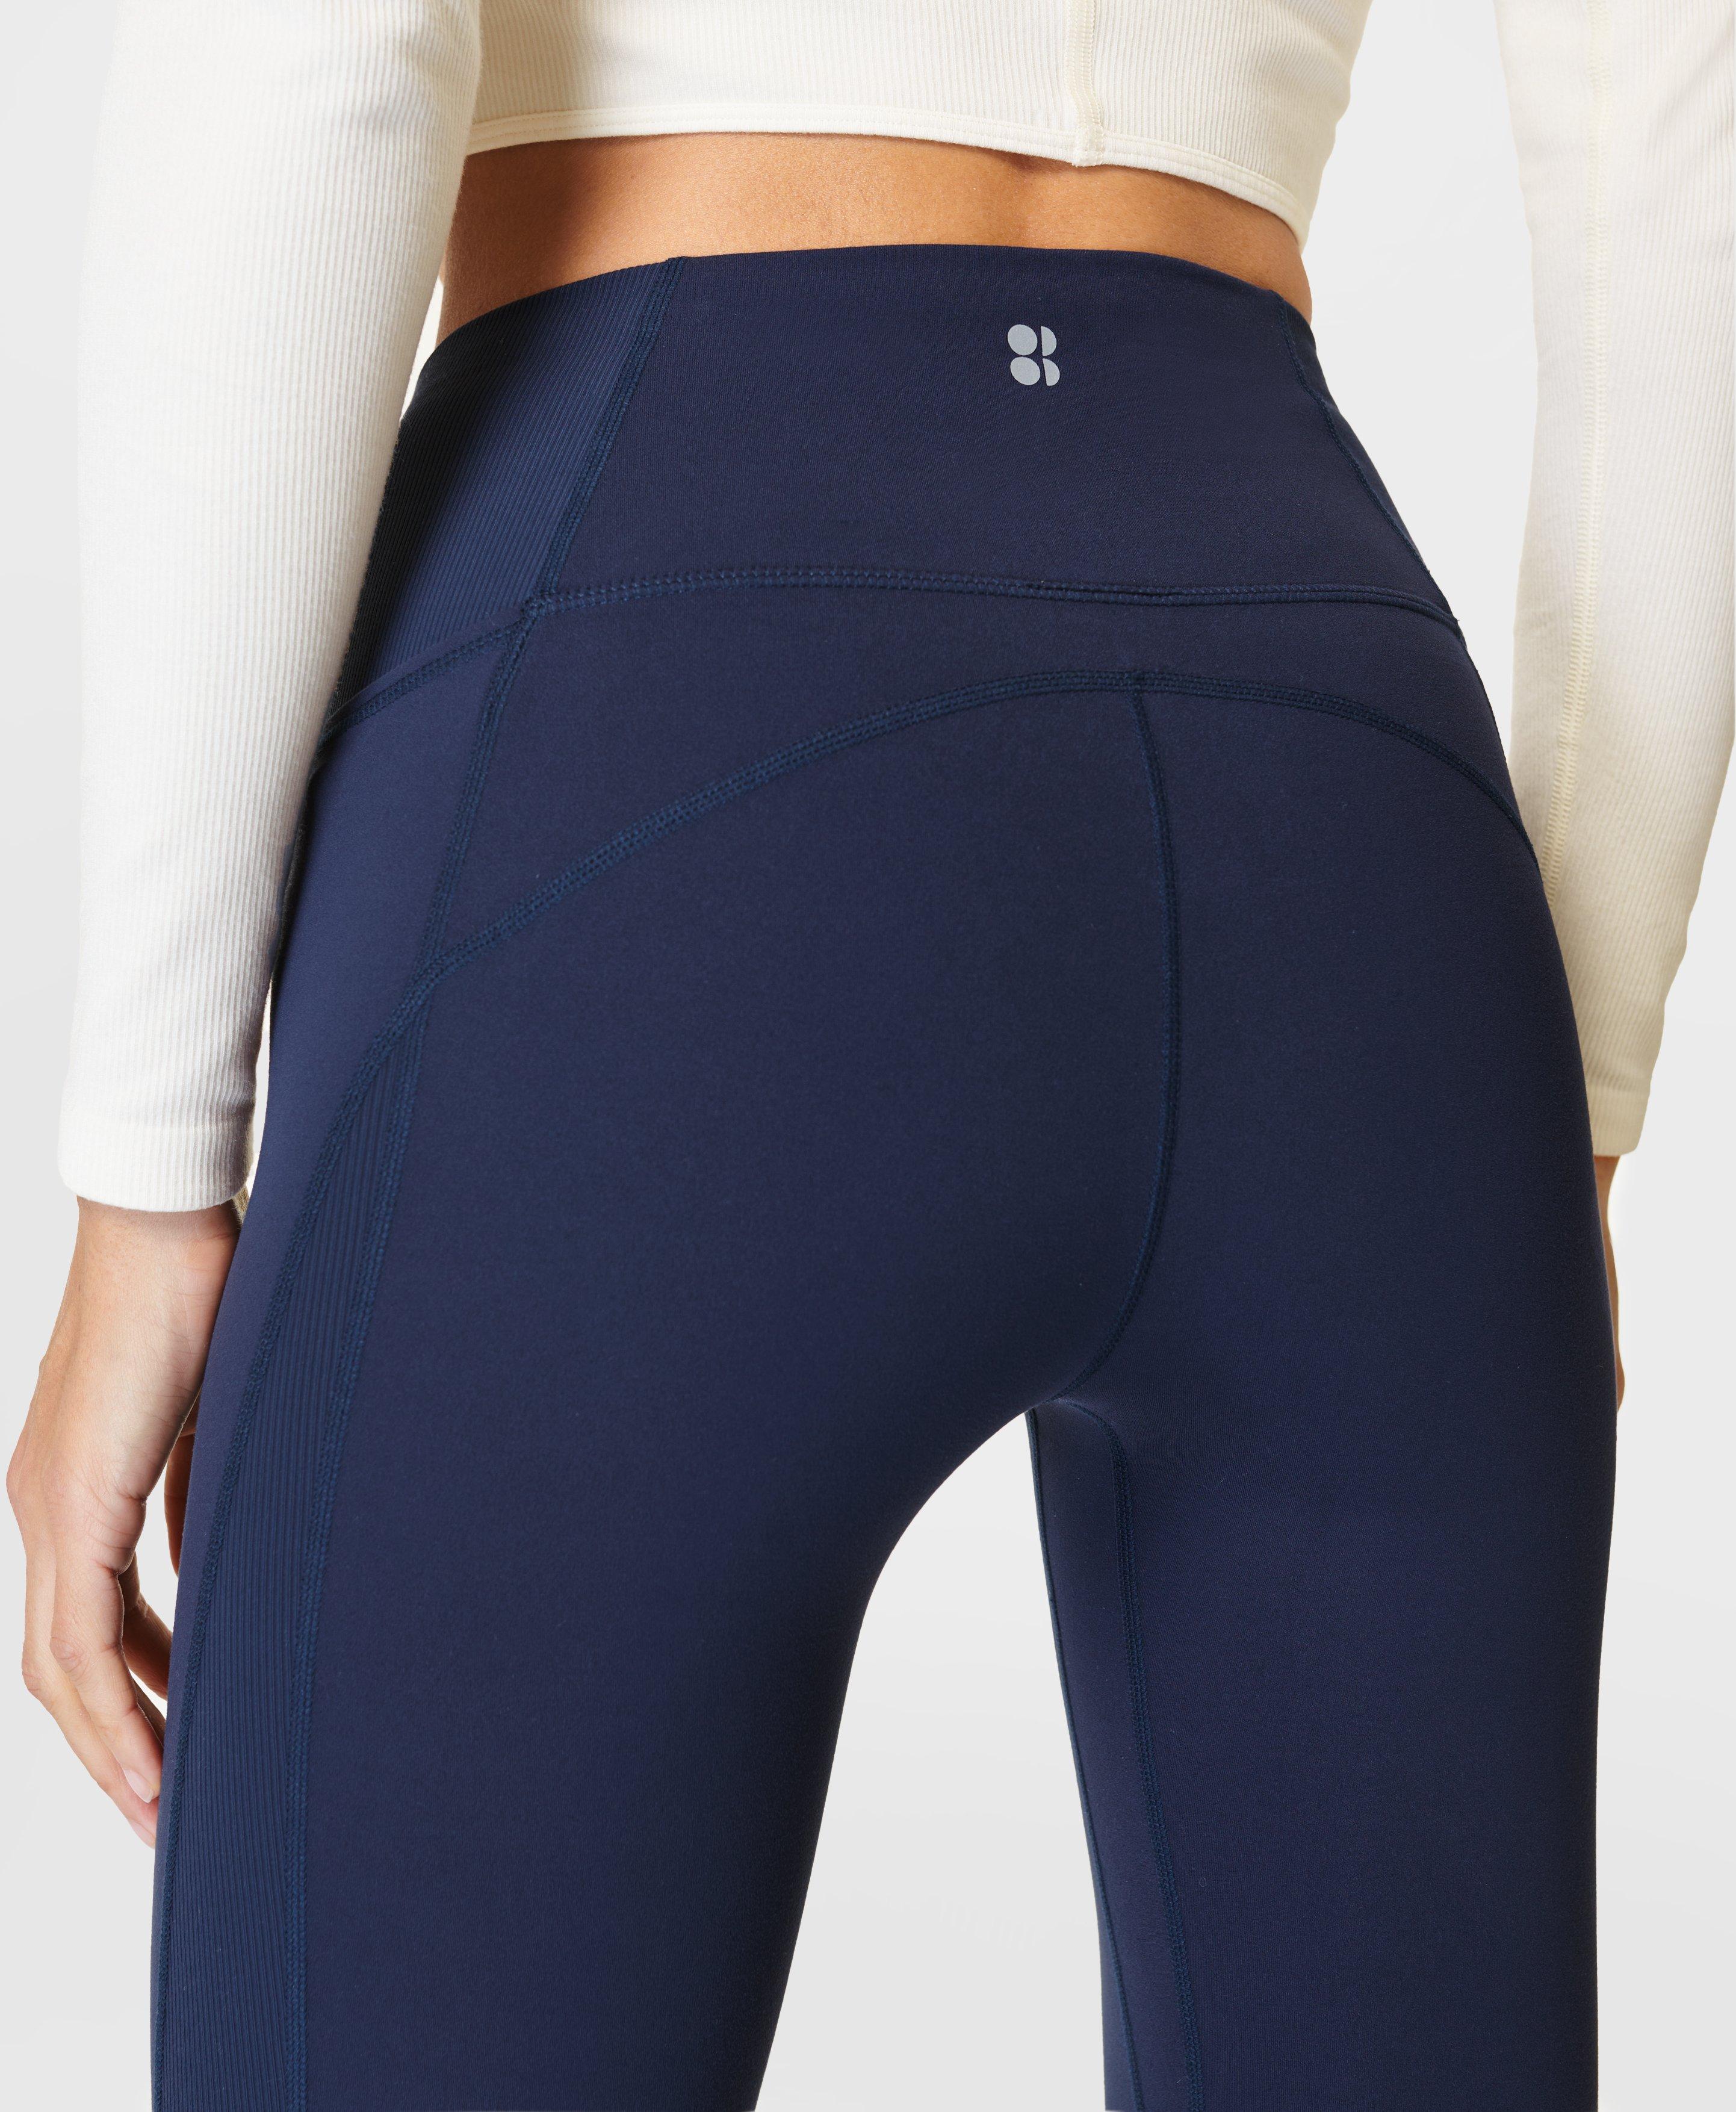 Navy Blue Womens High Waist Yoga Pants at Rs 530 in Kovilpatti